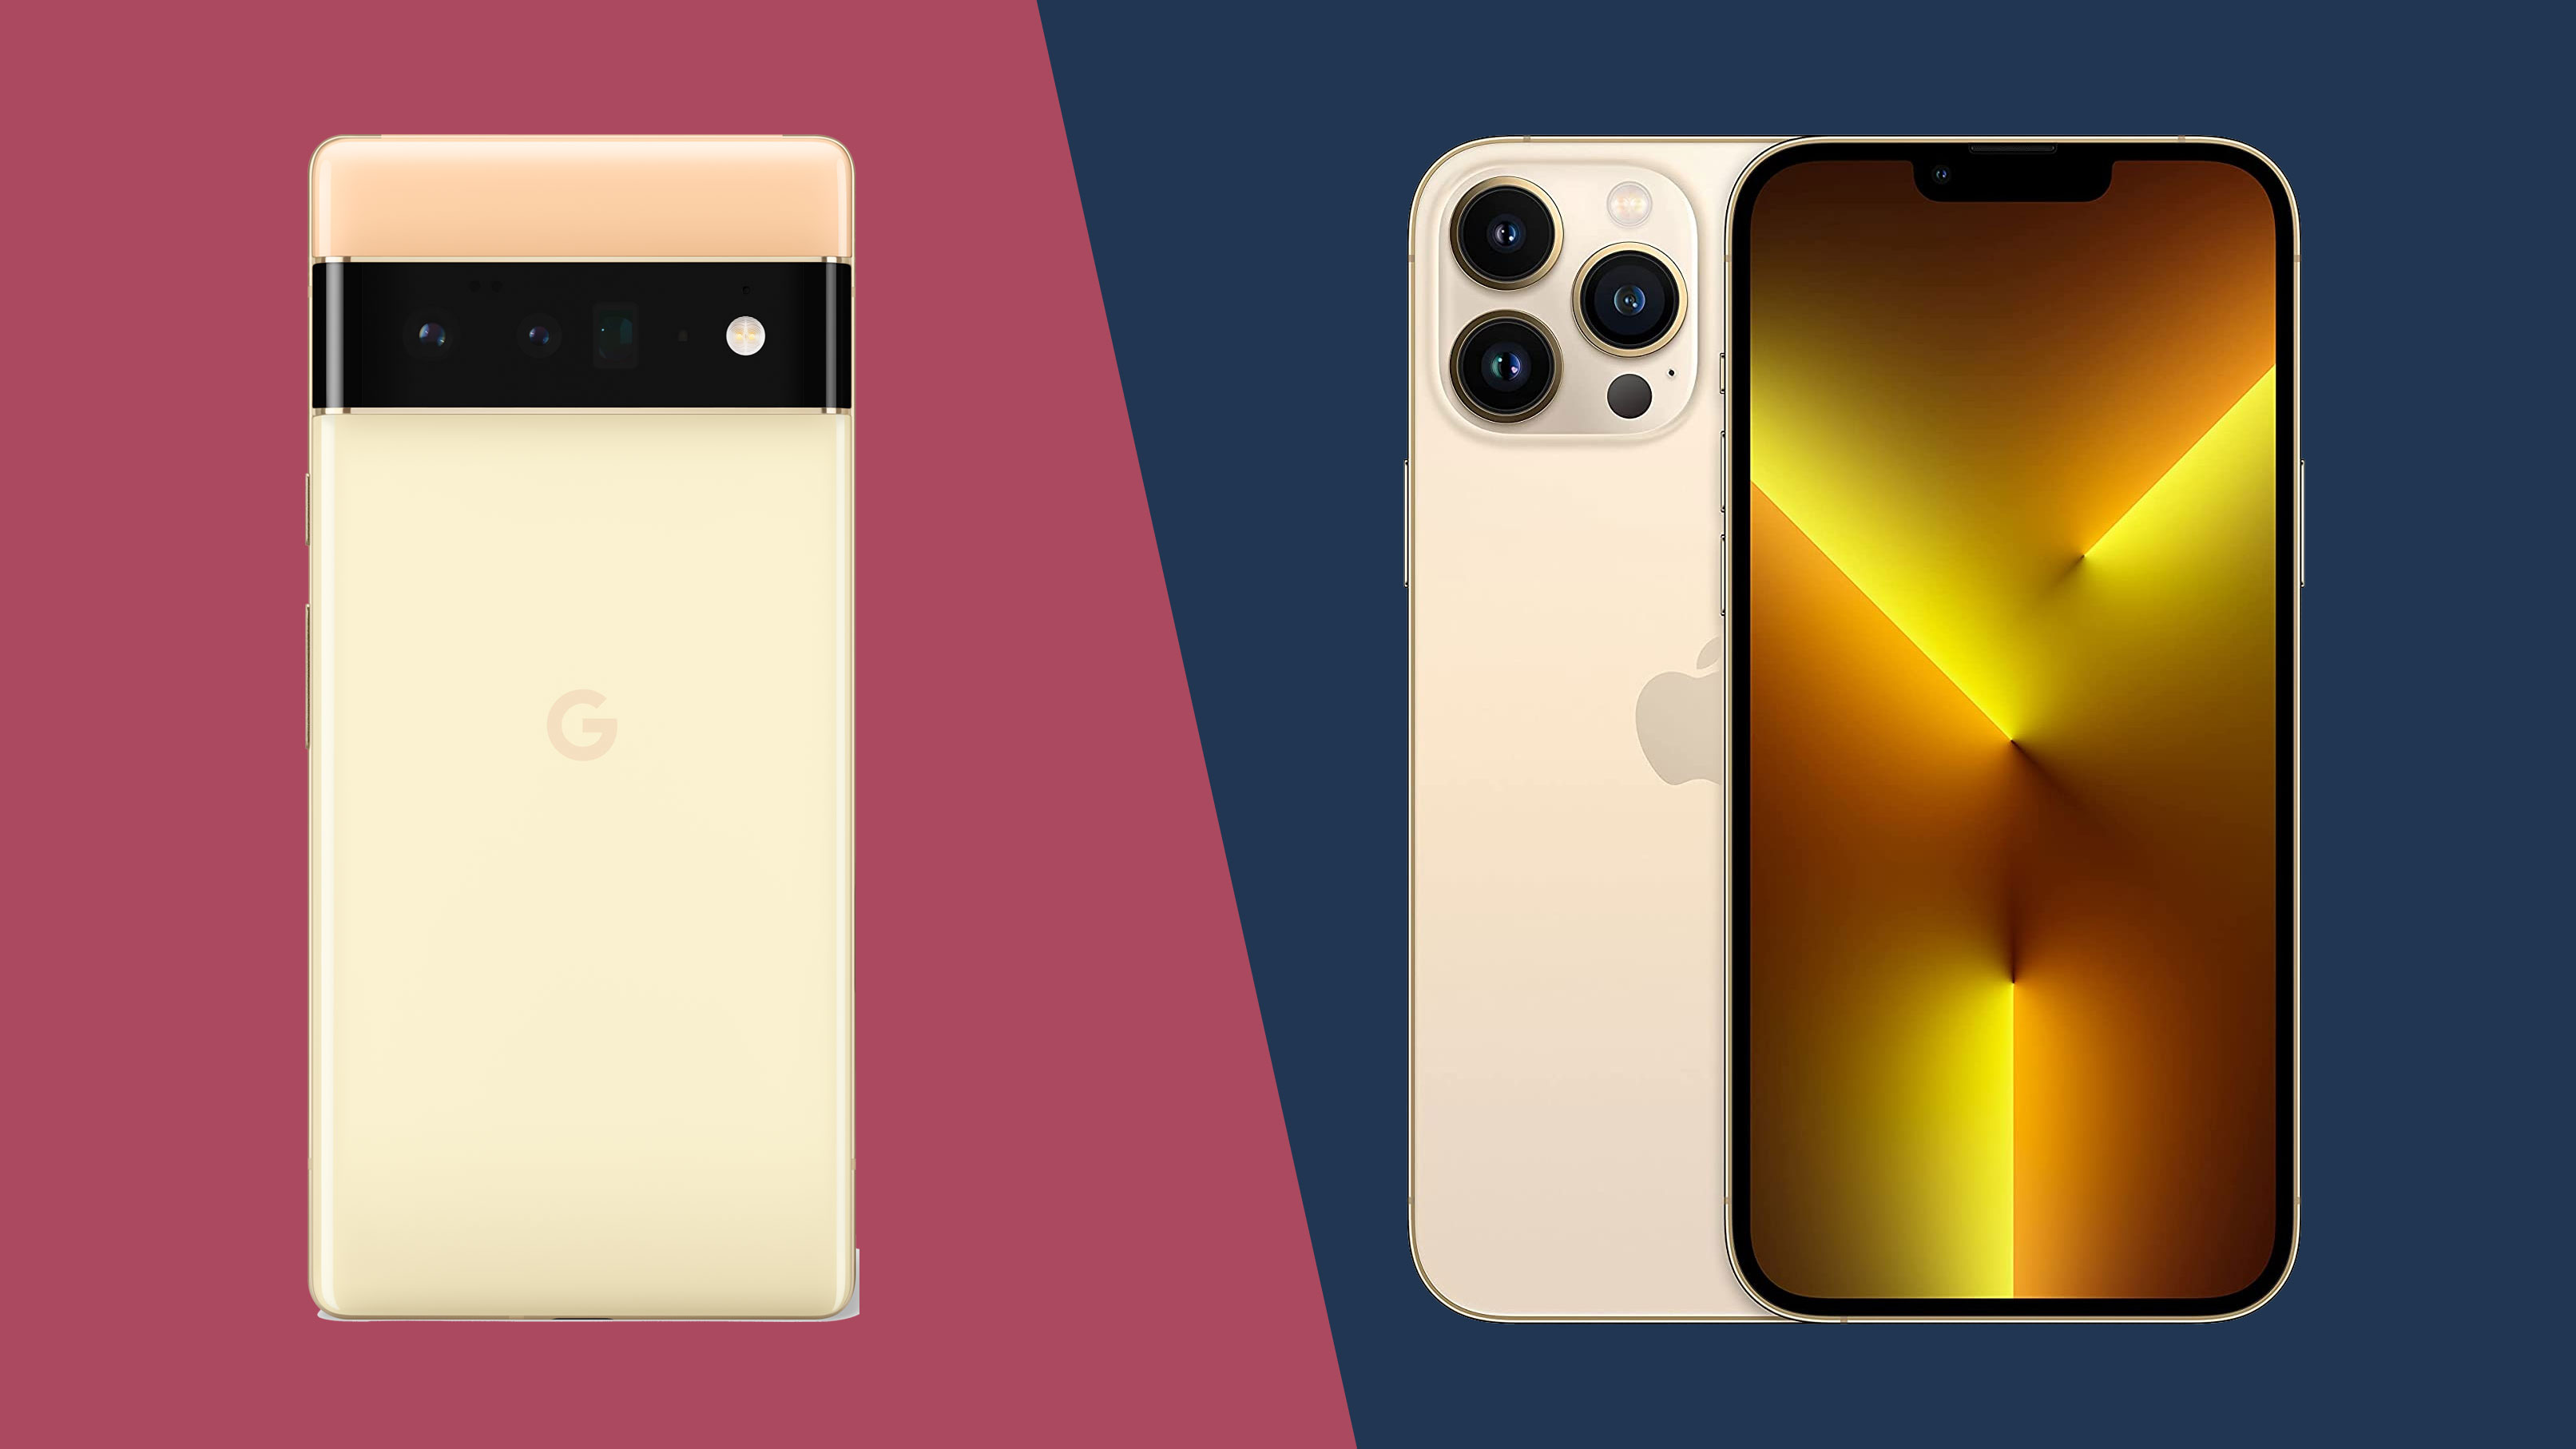 Google Pixel 6 Pro vs iPhone 13 Pro Max: Android and iOS top